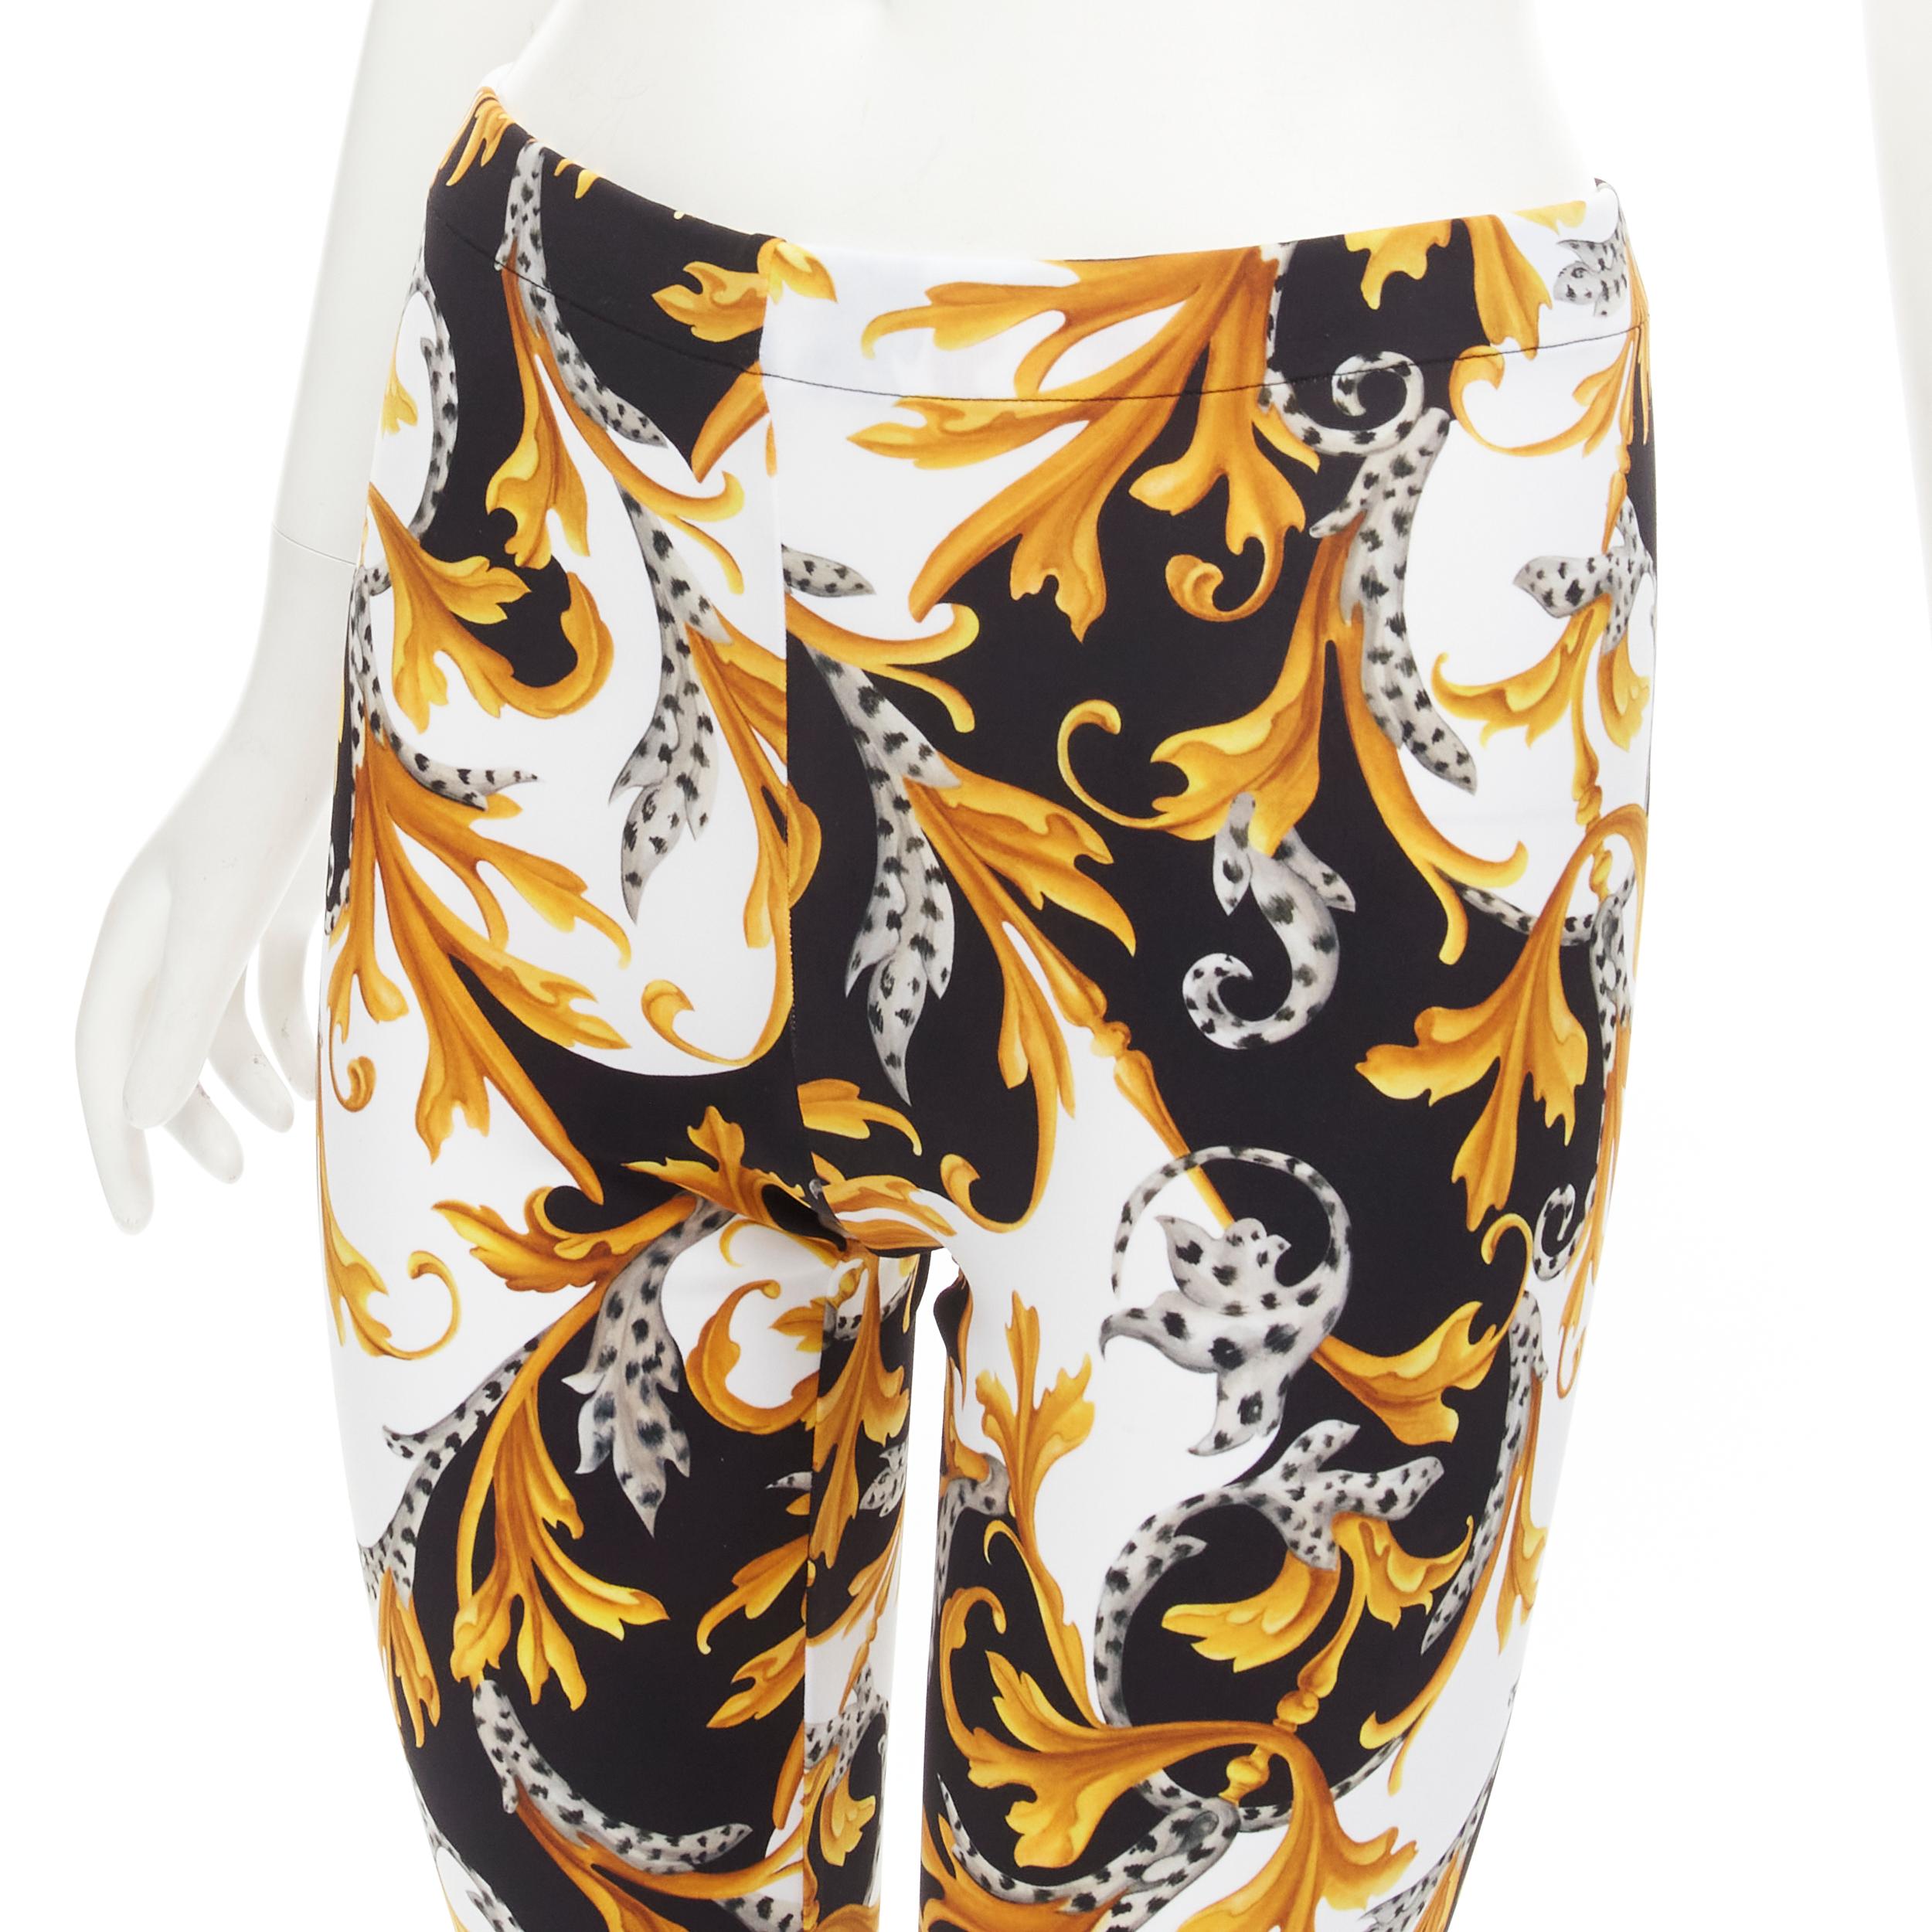 new VERSACE Barocco Acanthus black gold floral print stretchy leggings IT42 M
Brand: Versace
Designer: Donatella Versace
Material: Polyamide
Color: Gold
Pattern: Floral
Closure: Stretchy
Extra Detail: Stretch fit. Signature Barocco Acanthus